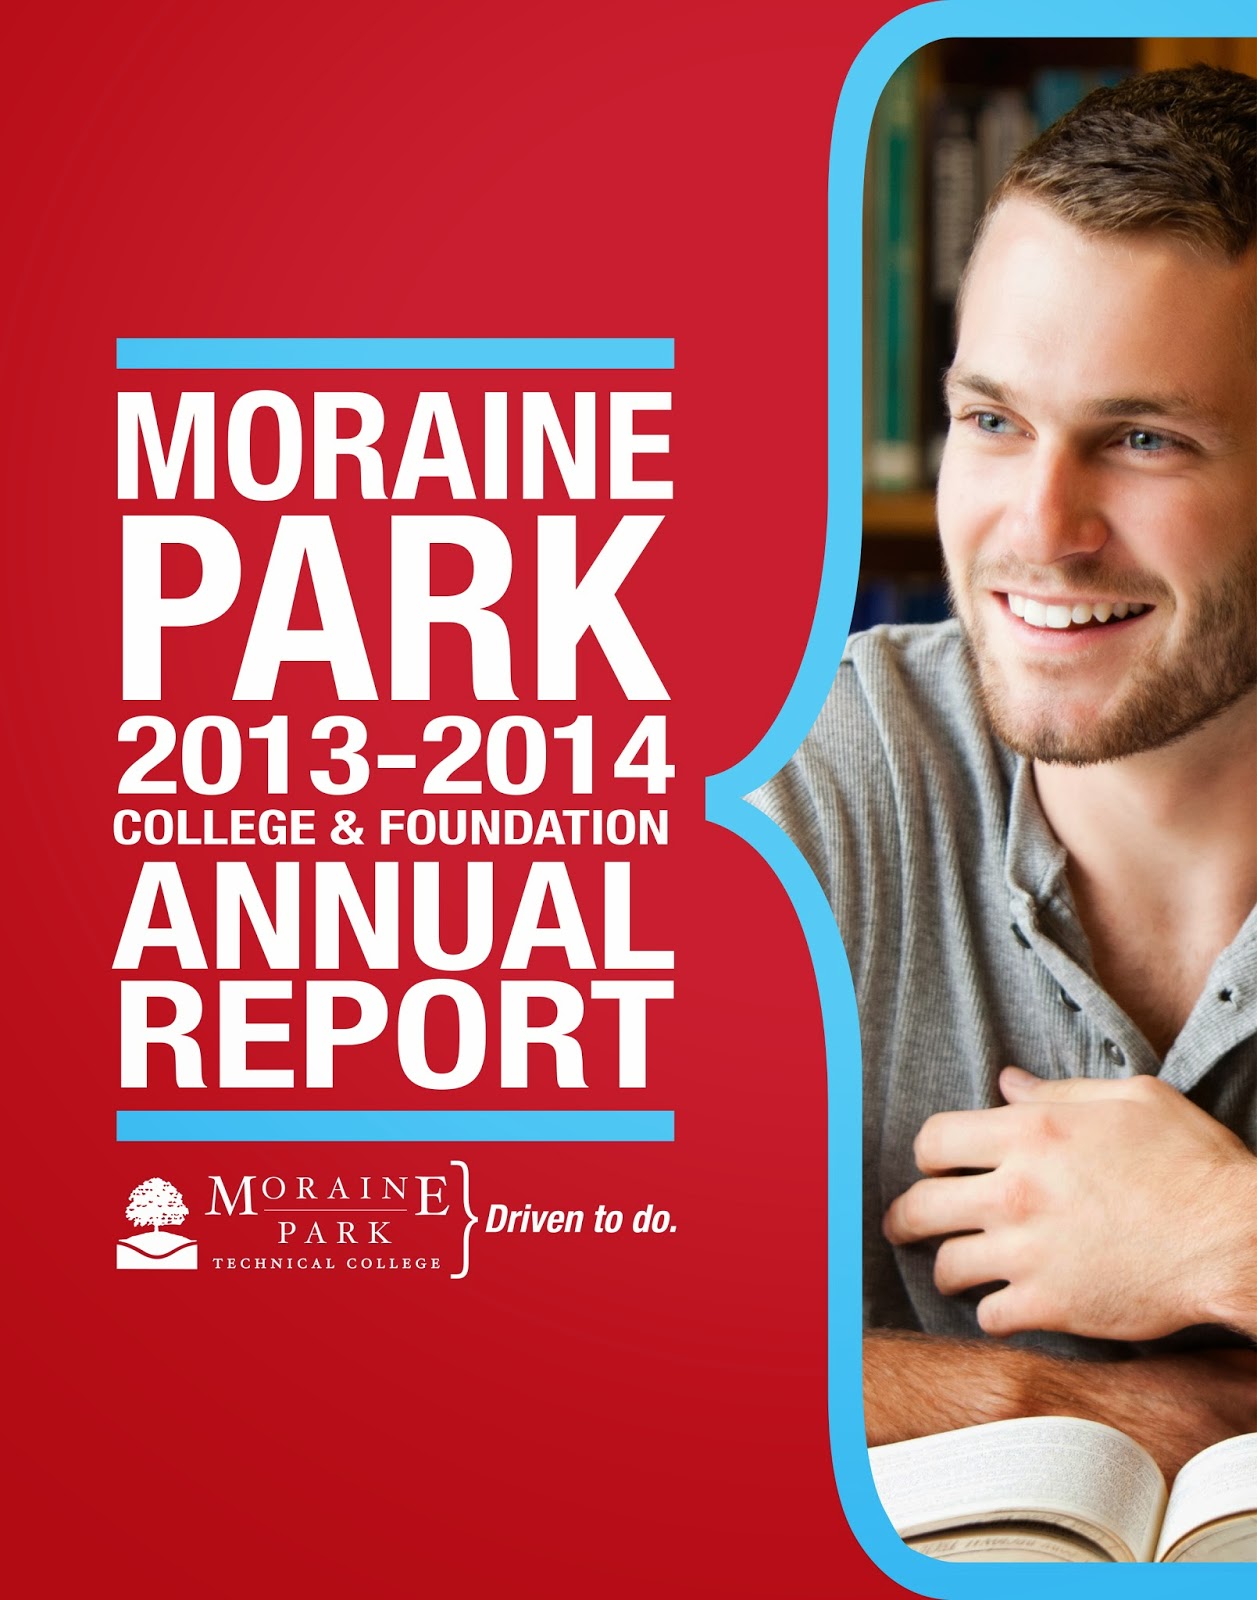 http://morainepark.edu/about-mptc/college-data-and-demographics/annual-report/